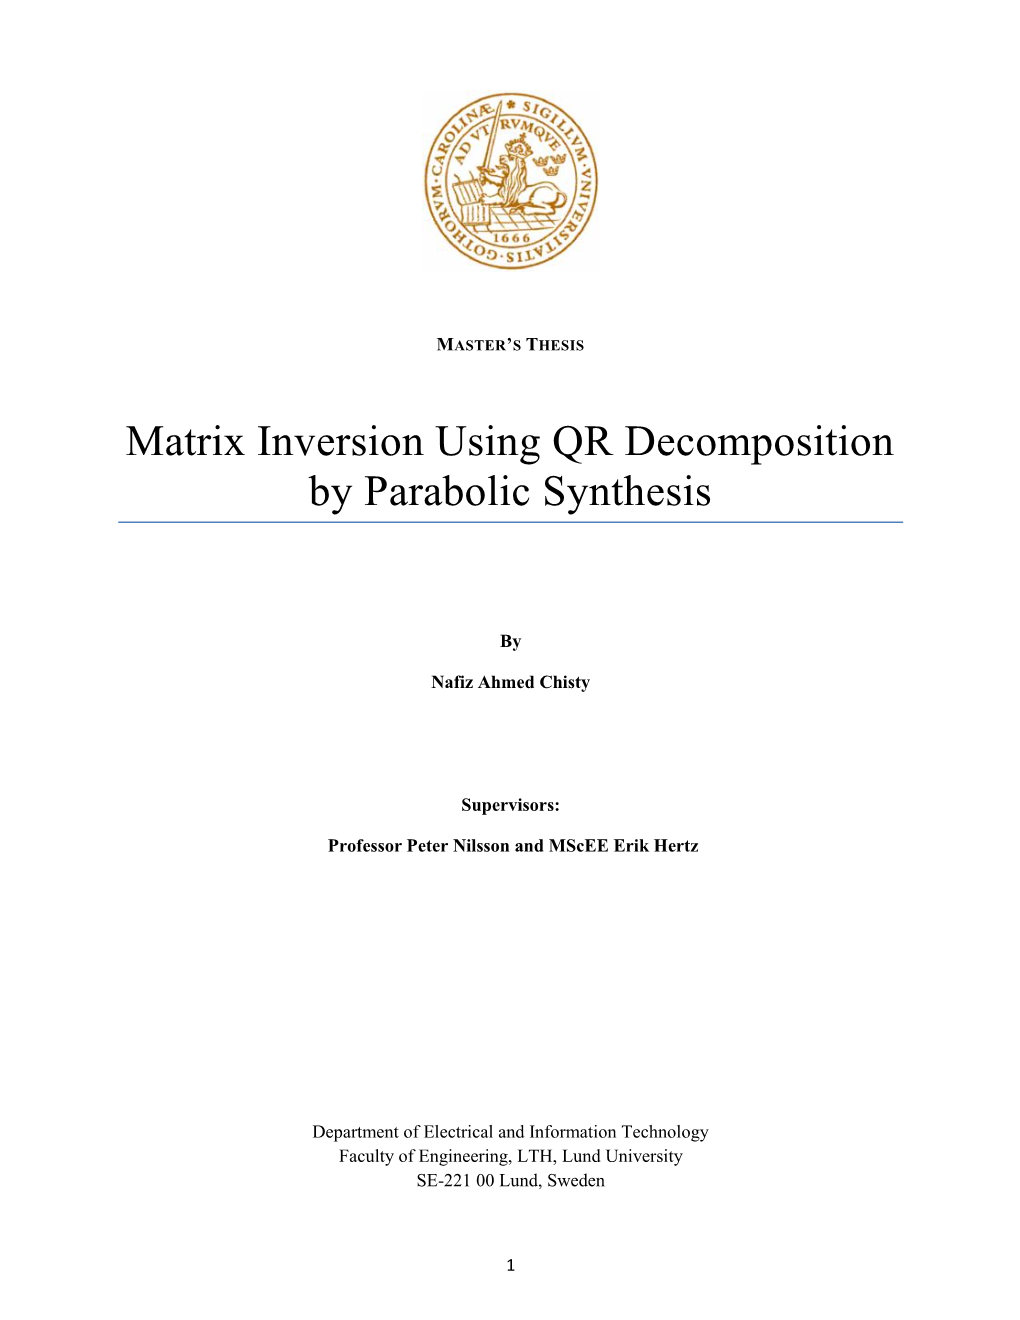 Matrix Inversion Using QR Decomposition by Parabolic Synthesis